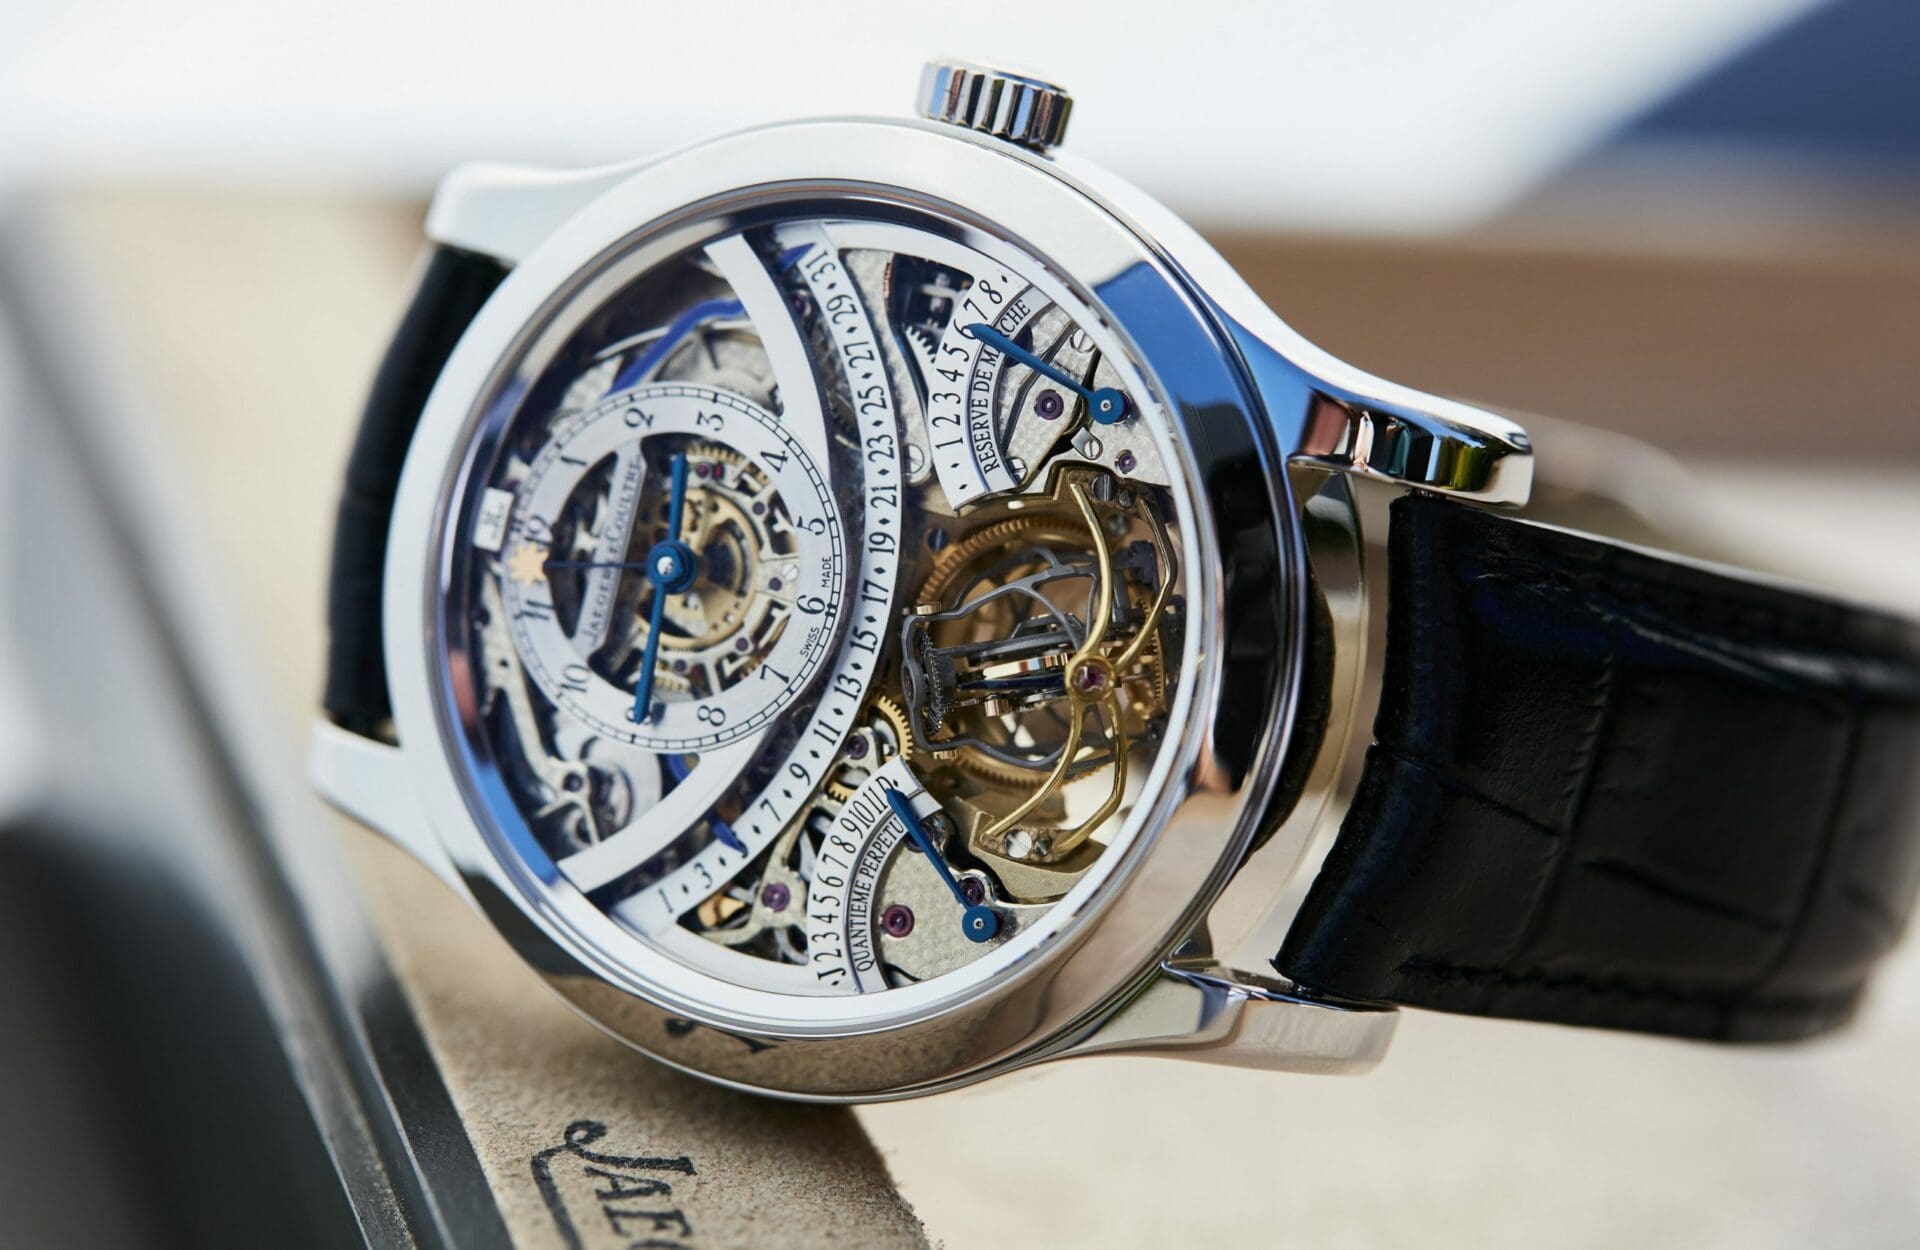 EVENT: 5 rare high-complication watches from Jaeger-LeCoultre in a stunning vineyard setting